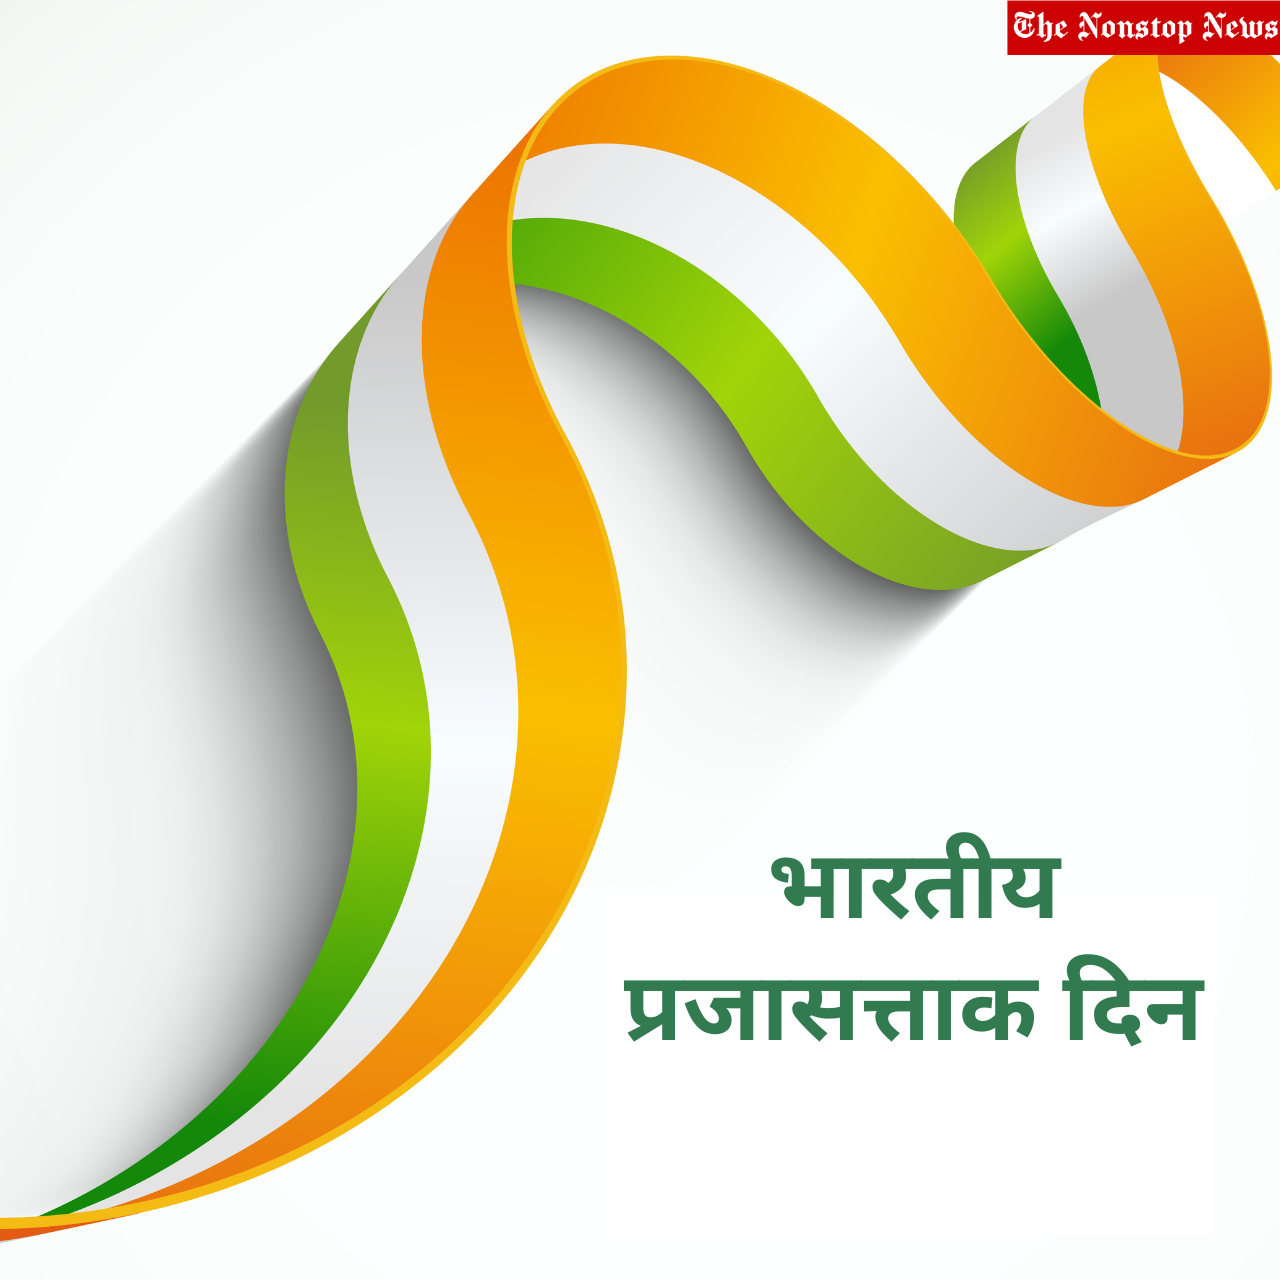 Happy 74th Republic Day 2023 Marathi and Gujarati Banners, Greetings, Slogans, Posters, Wishes, Messages and Images